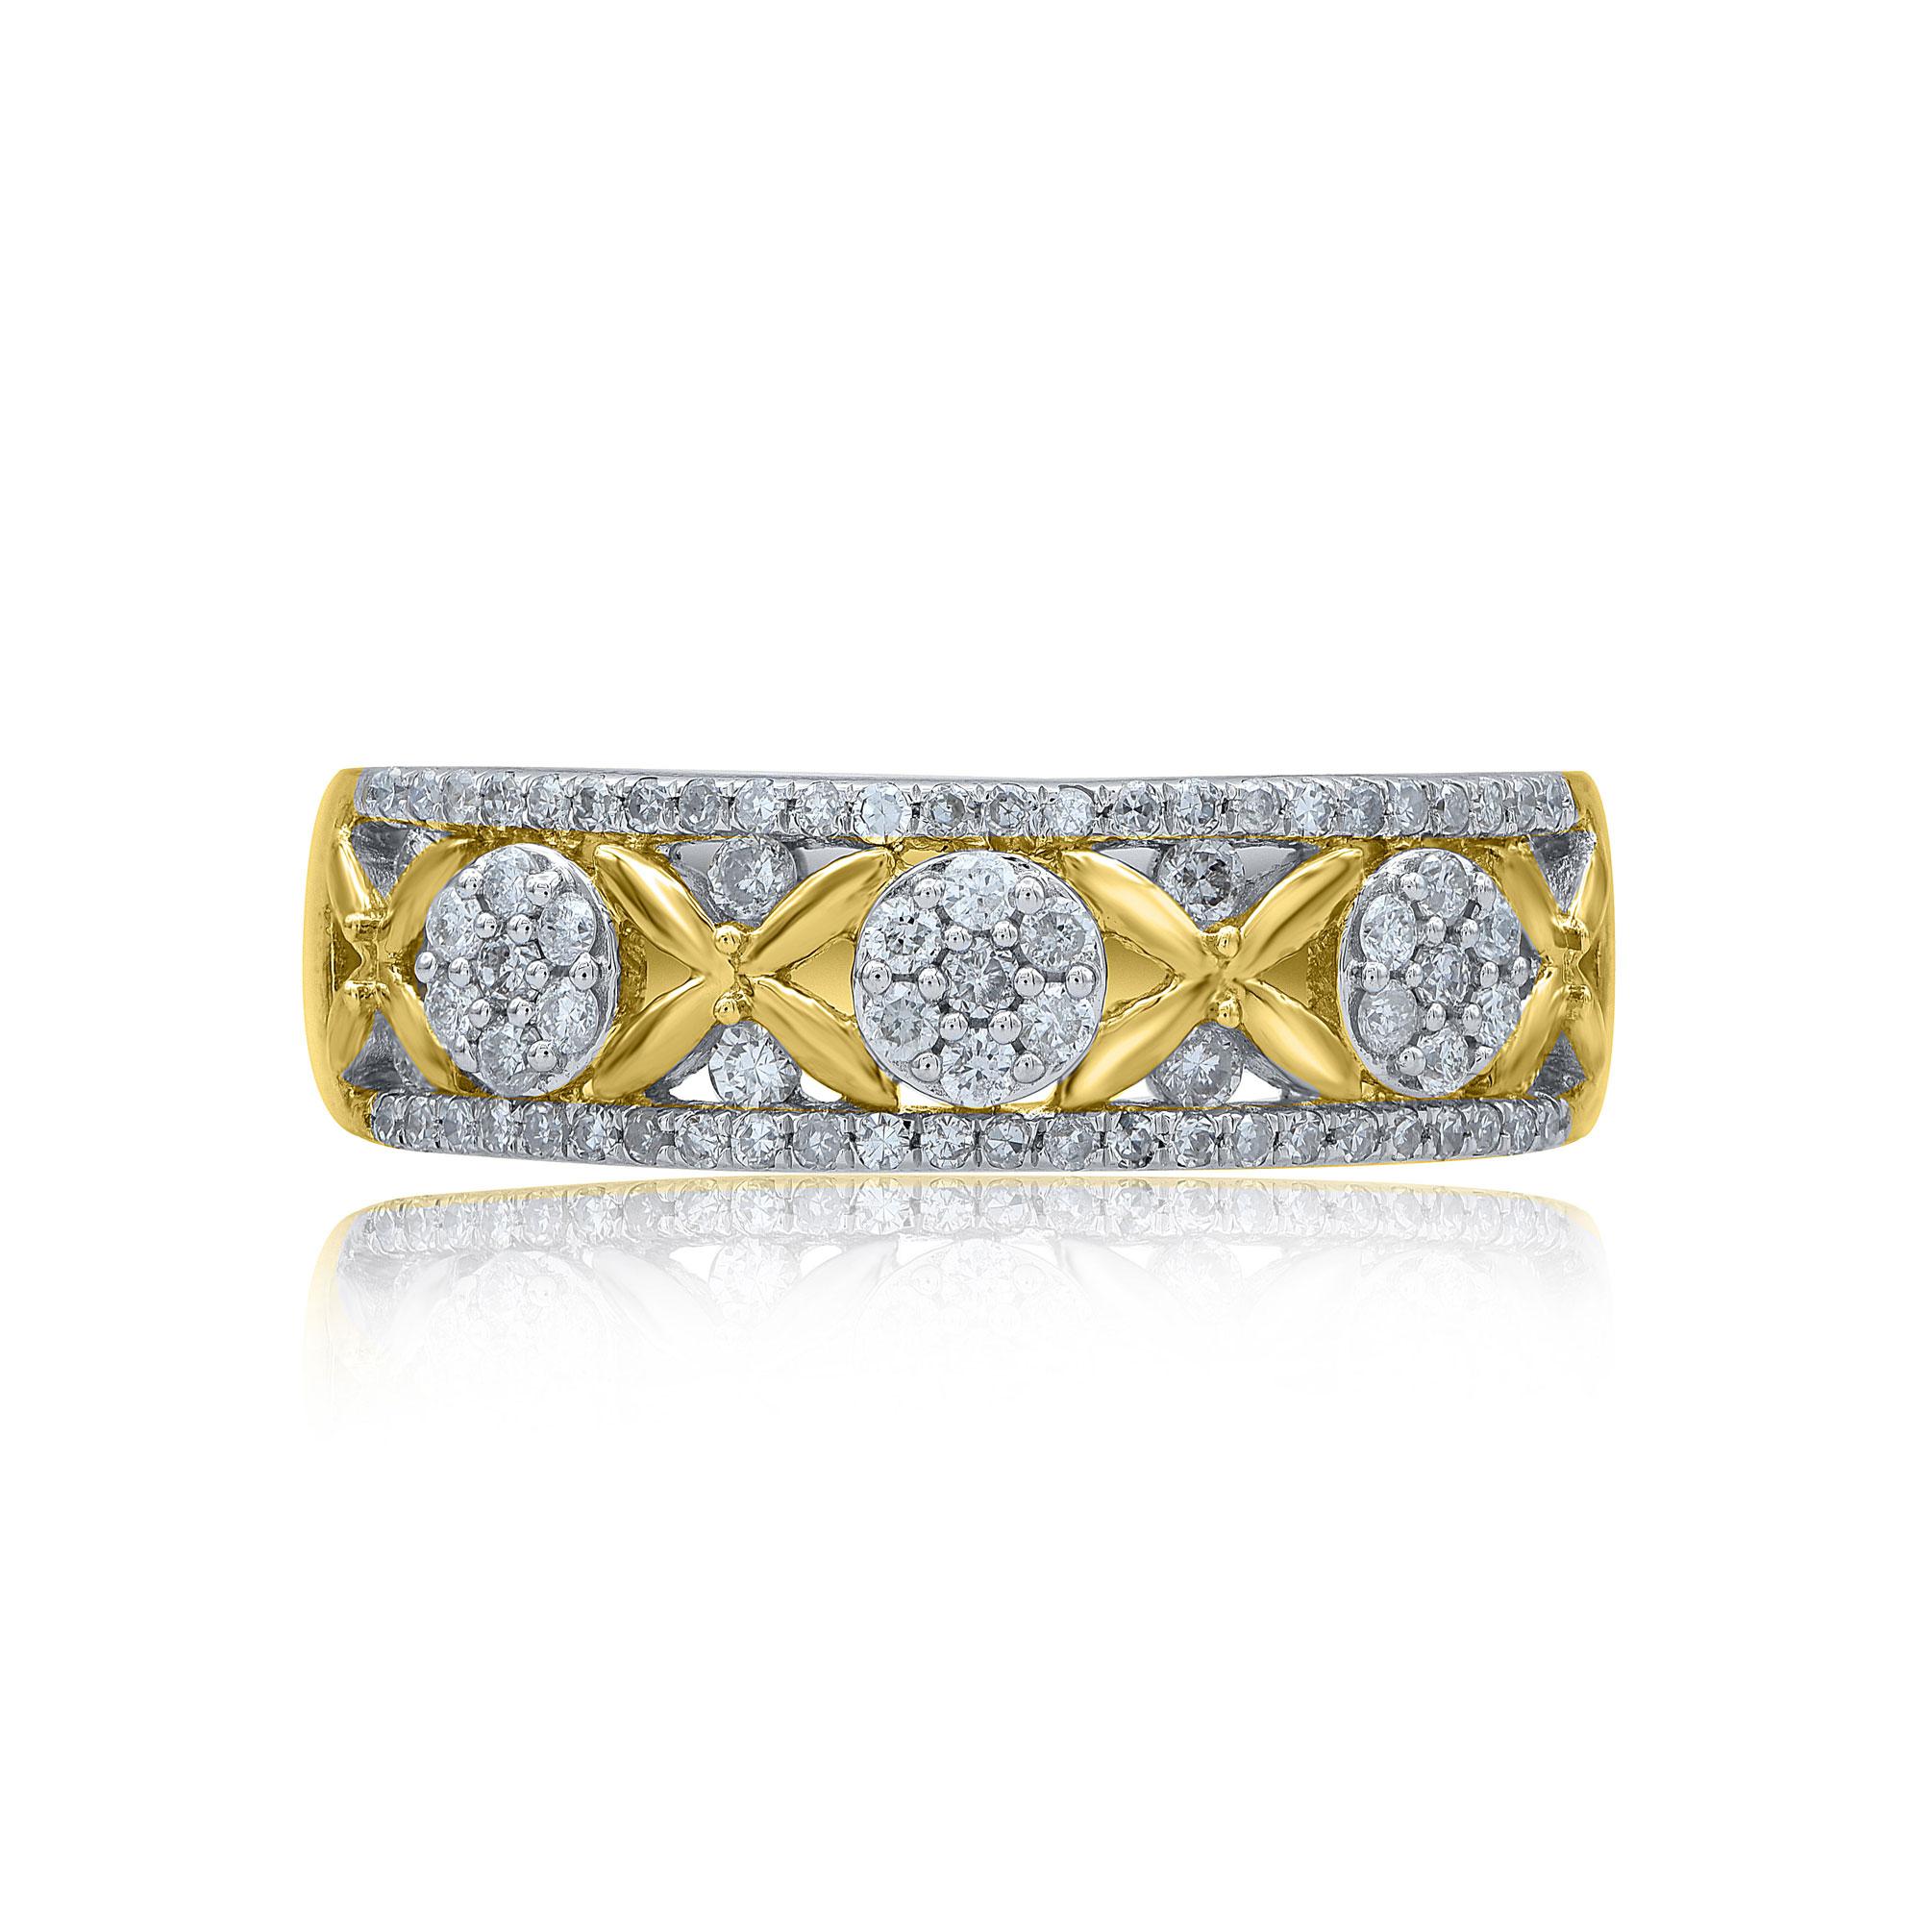 Make your most special and precious day shine with this wedding band ring. These band ring are studded with 77 brilliant cut and single cut natural diamonds in 14 karat yellow gold in prong, pave and Half channel setting . The white diamonds are